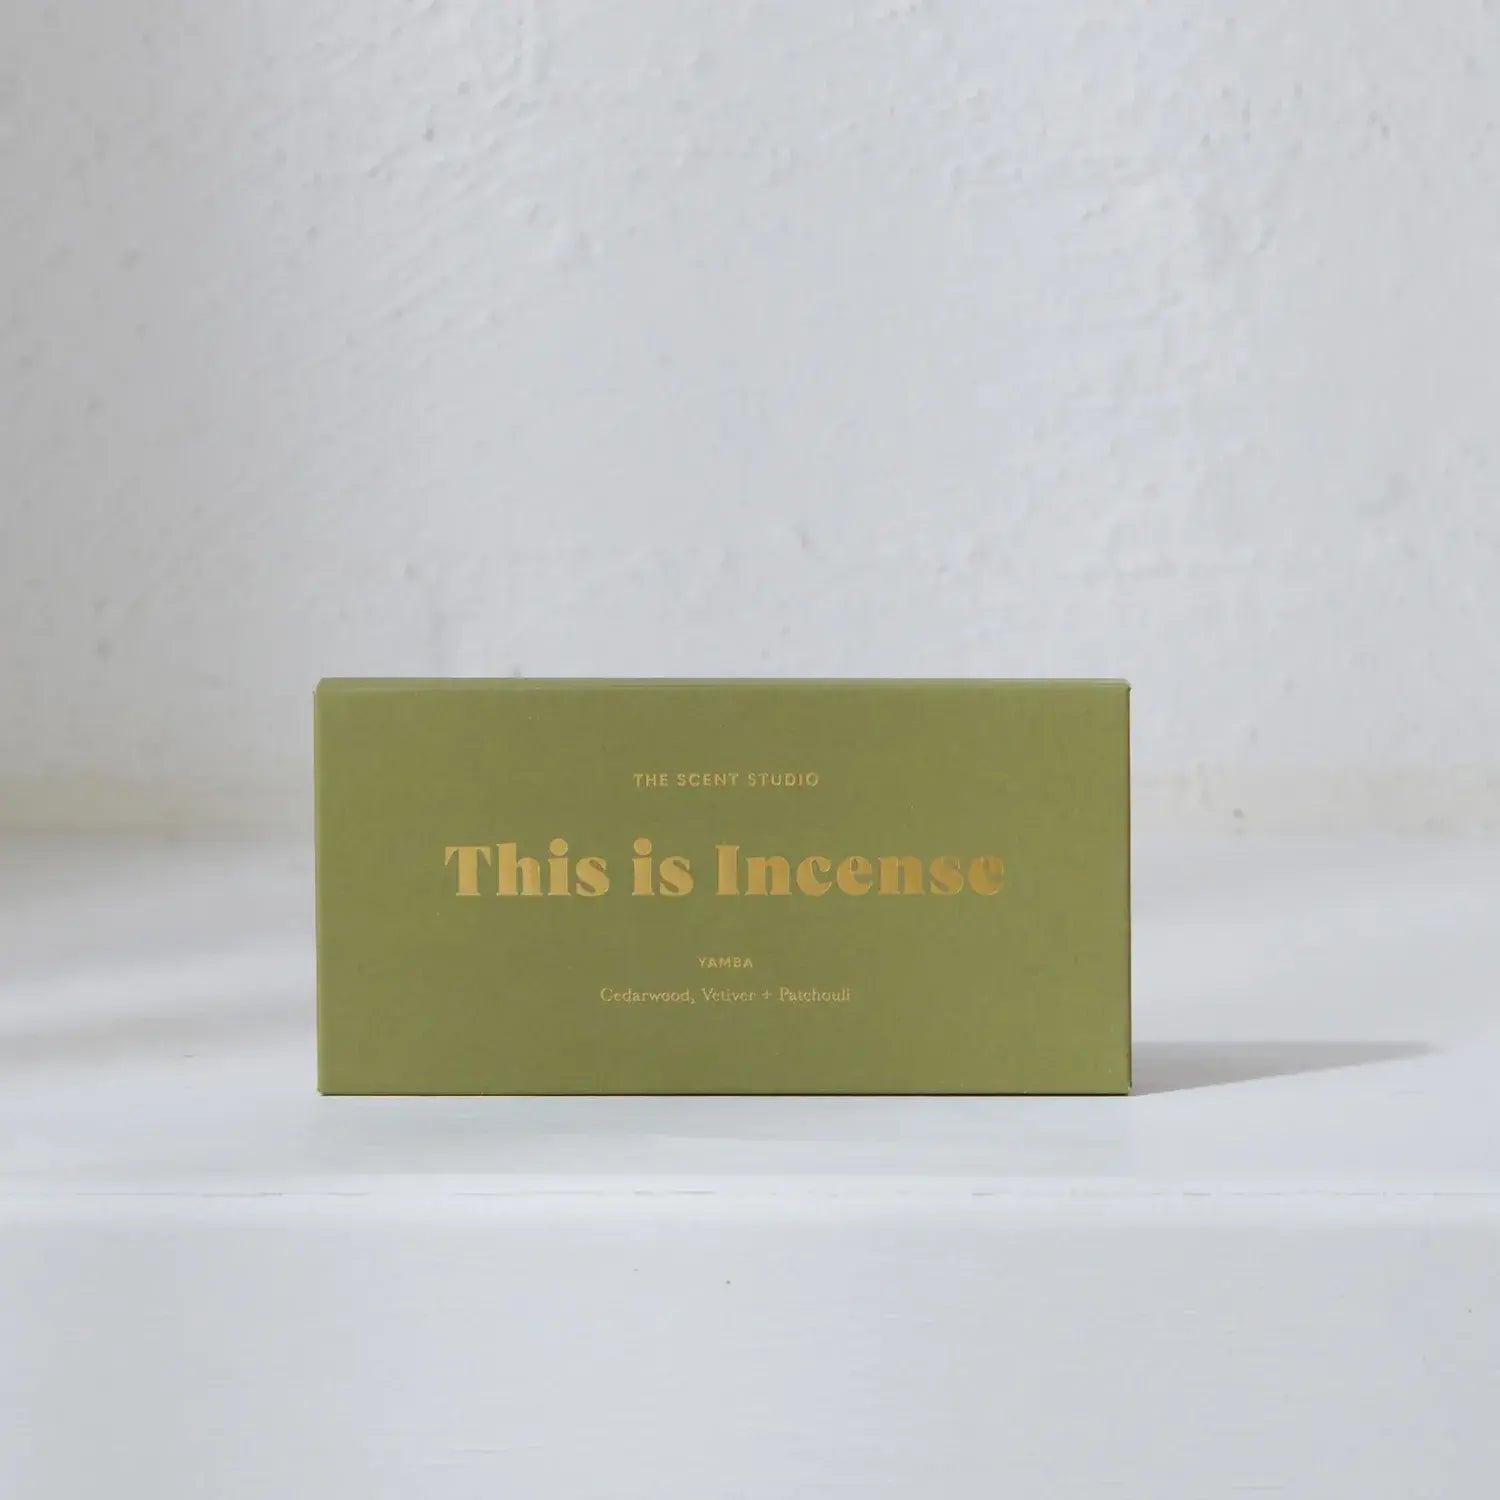 This is Incense by Gentle Habits - Yamba